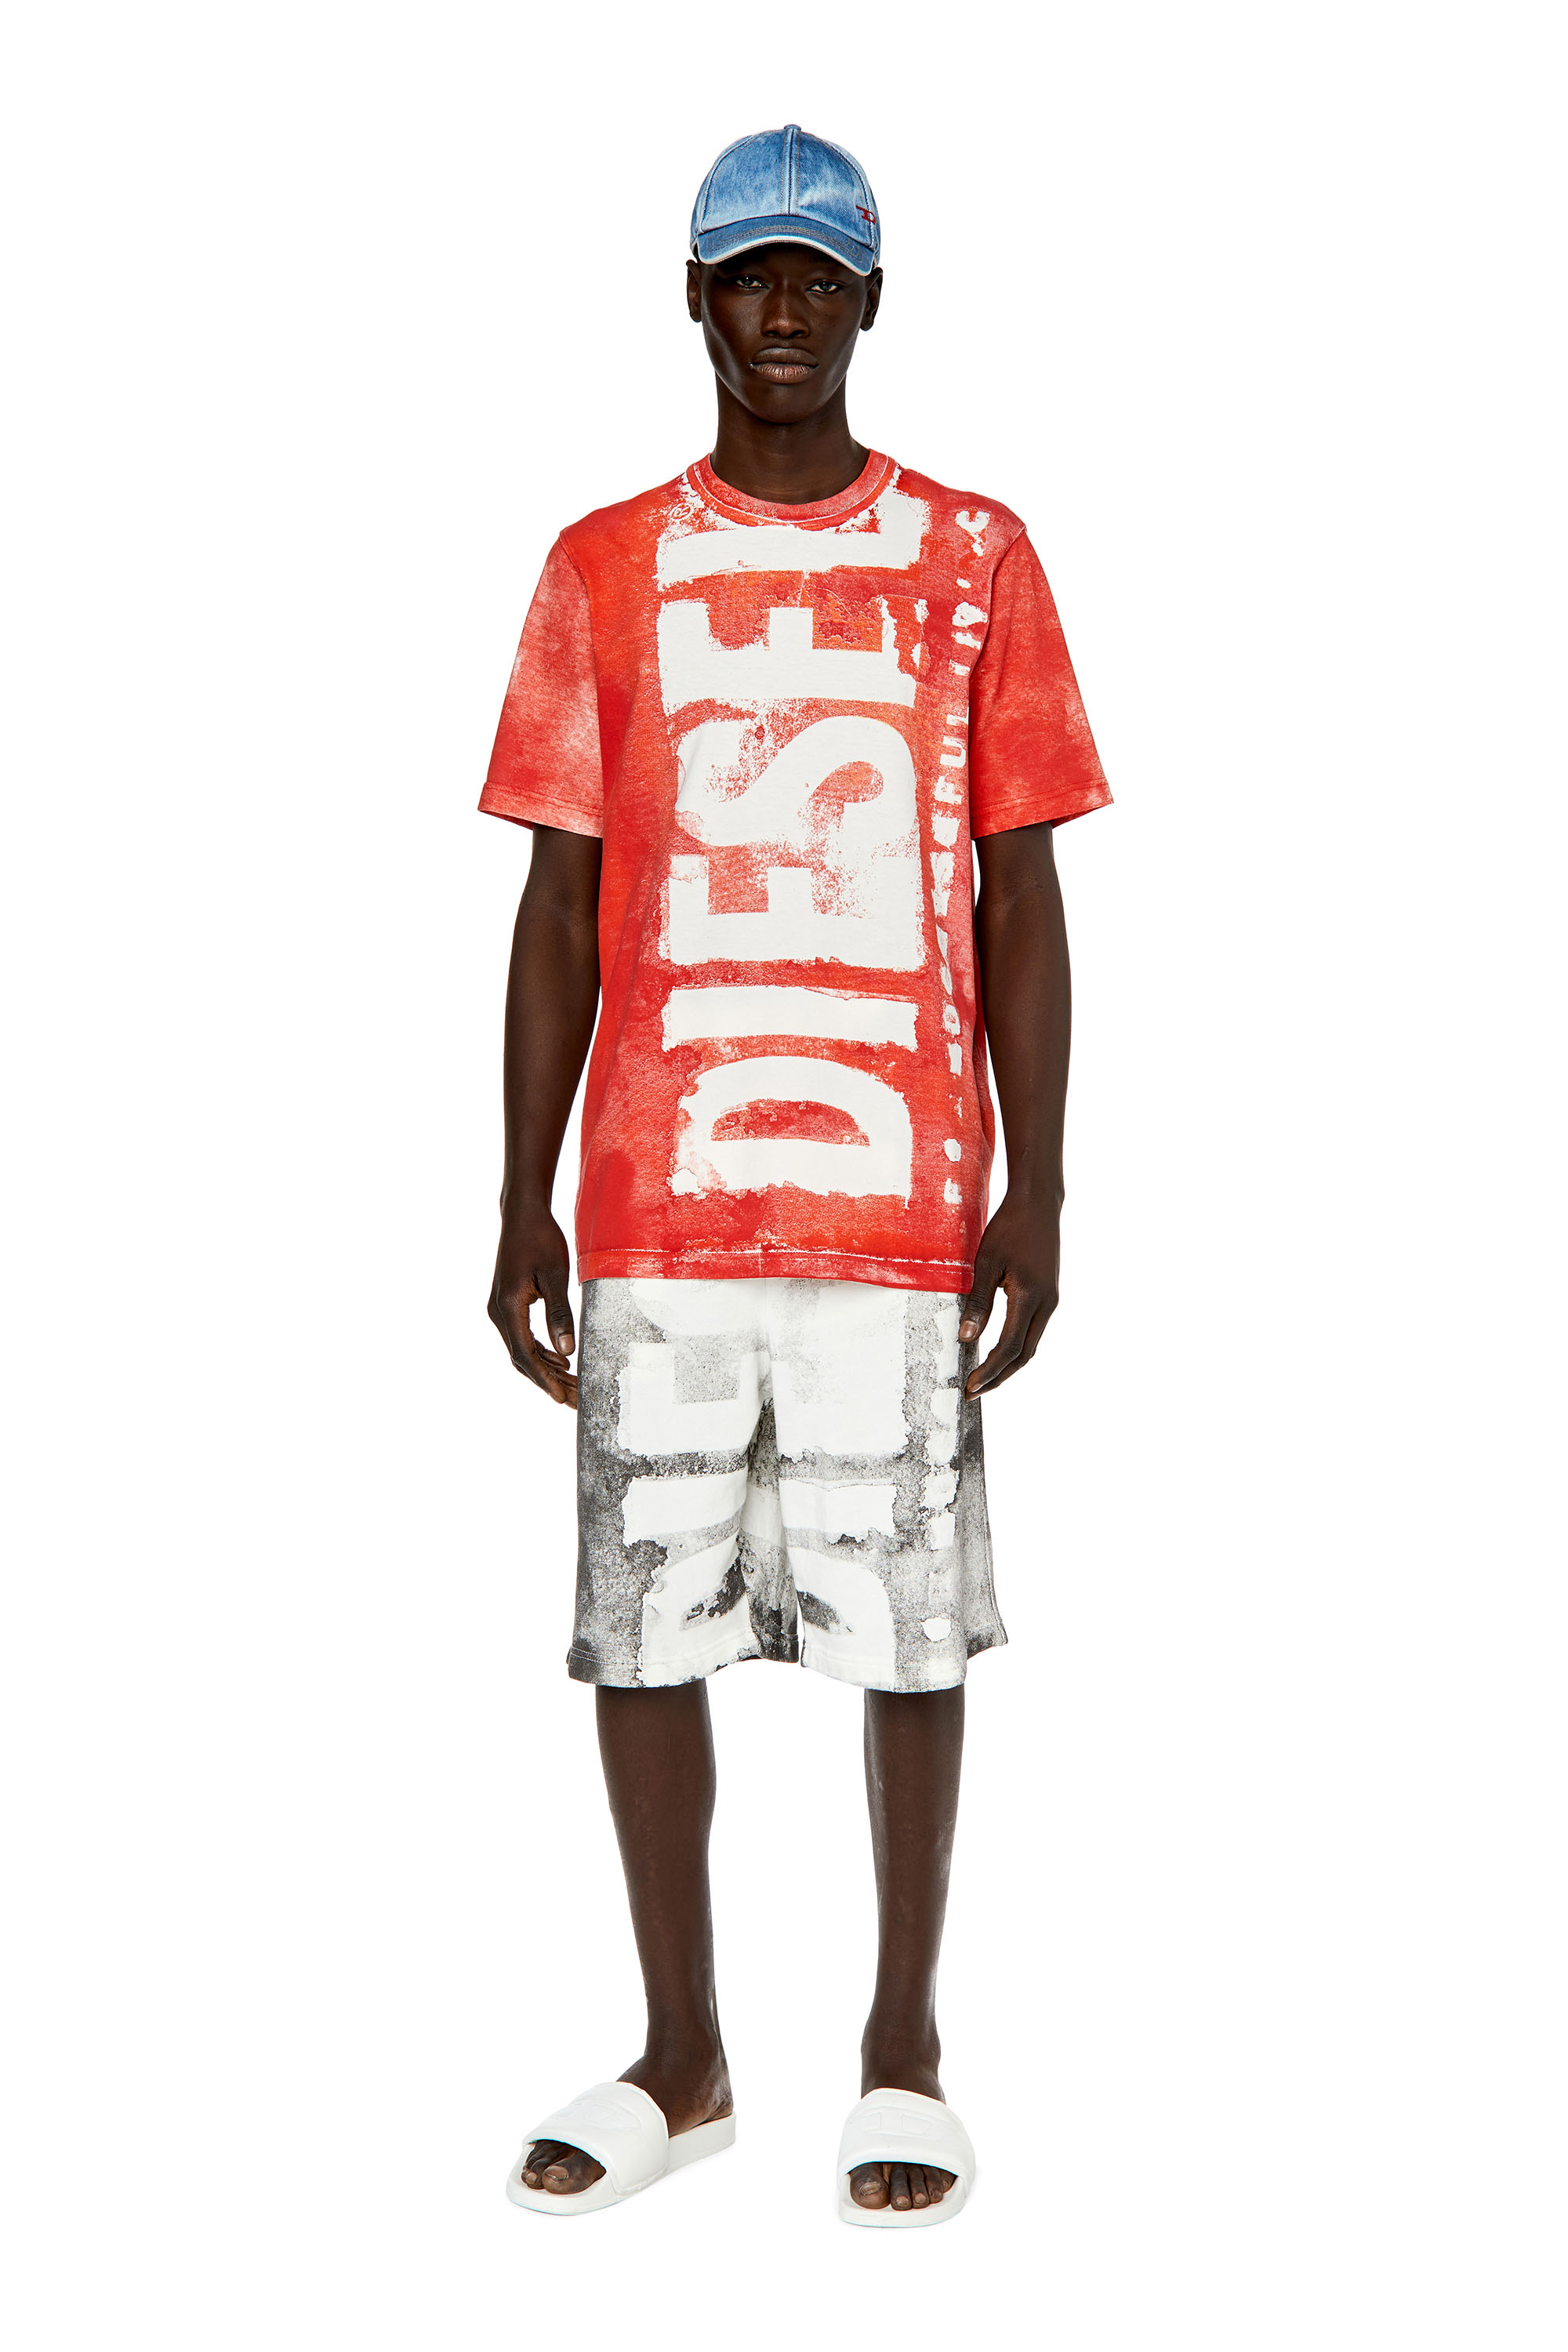 Diesel - T-JUST-G12, Rosso - Image 2